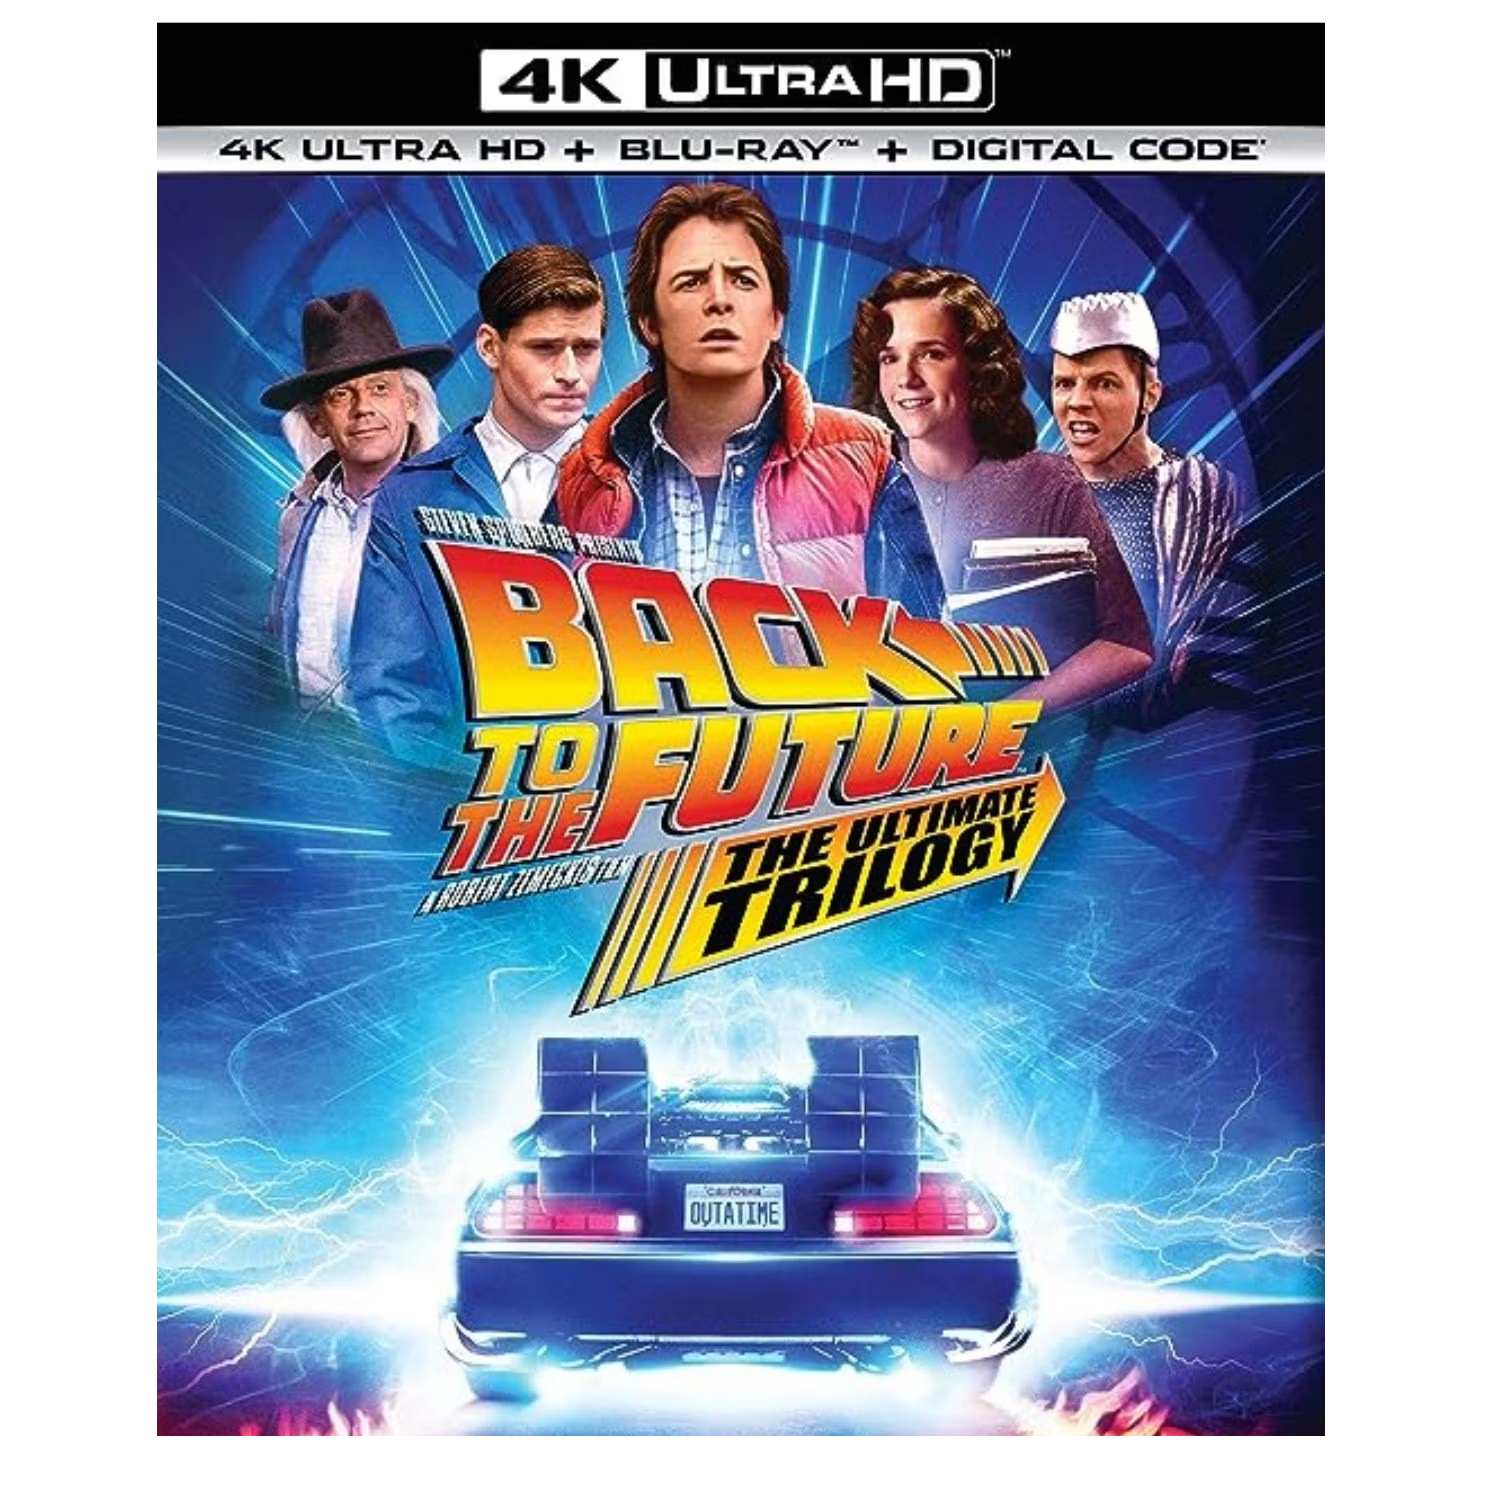 Back to the Future Trilogy on Blu-ray